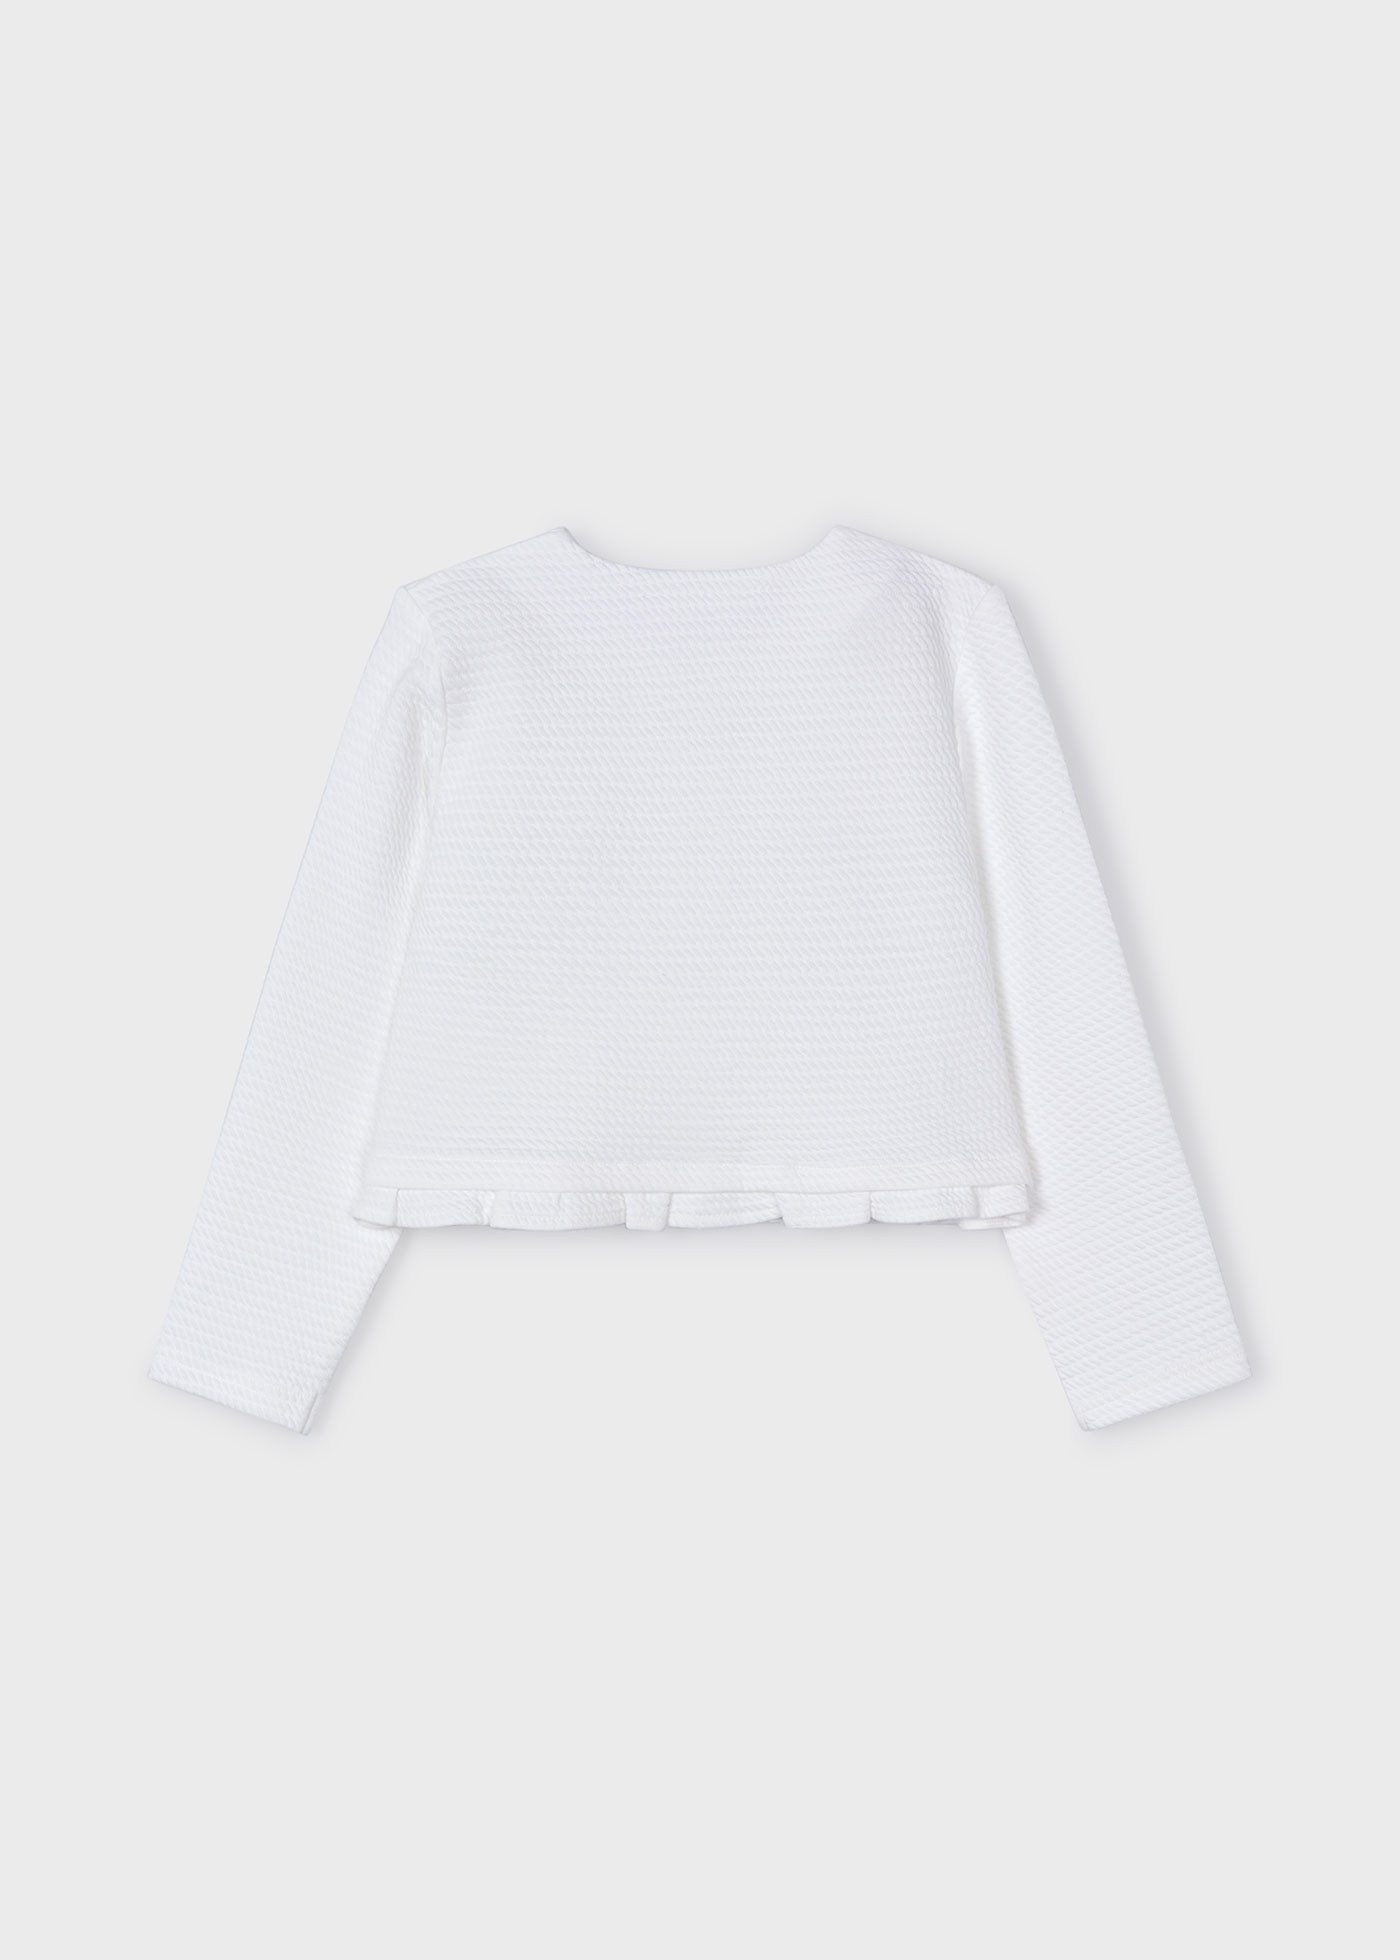 https://assets.mayoral.com/images/t_auto_img,f_auto,c_limit,w_1920/v1702228571/24-54359-700-XL-5/girl-structured-knit-cardigan-white-XL-5.jpg